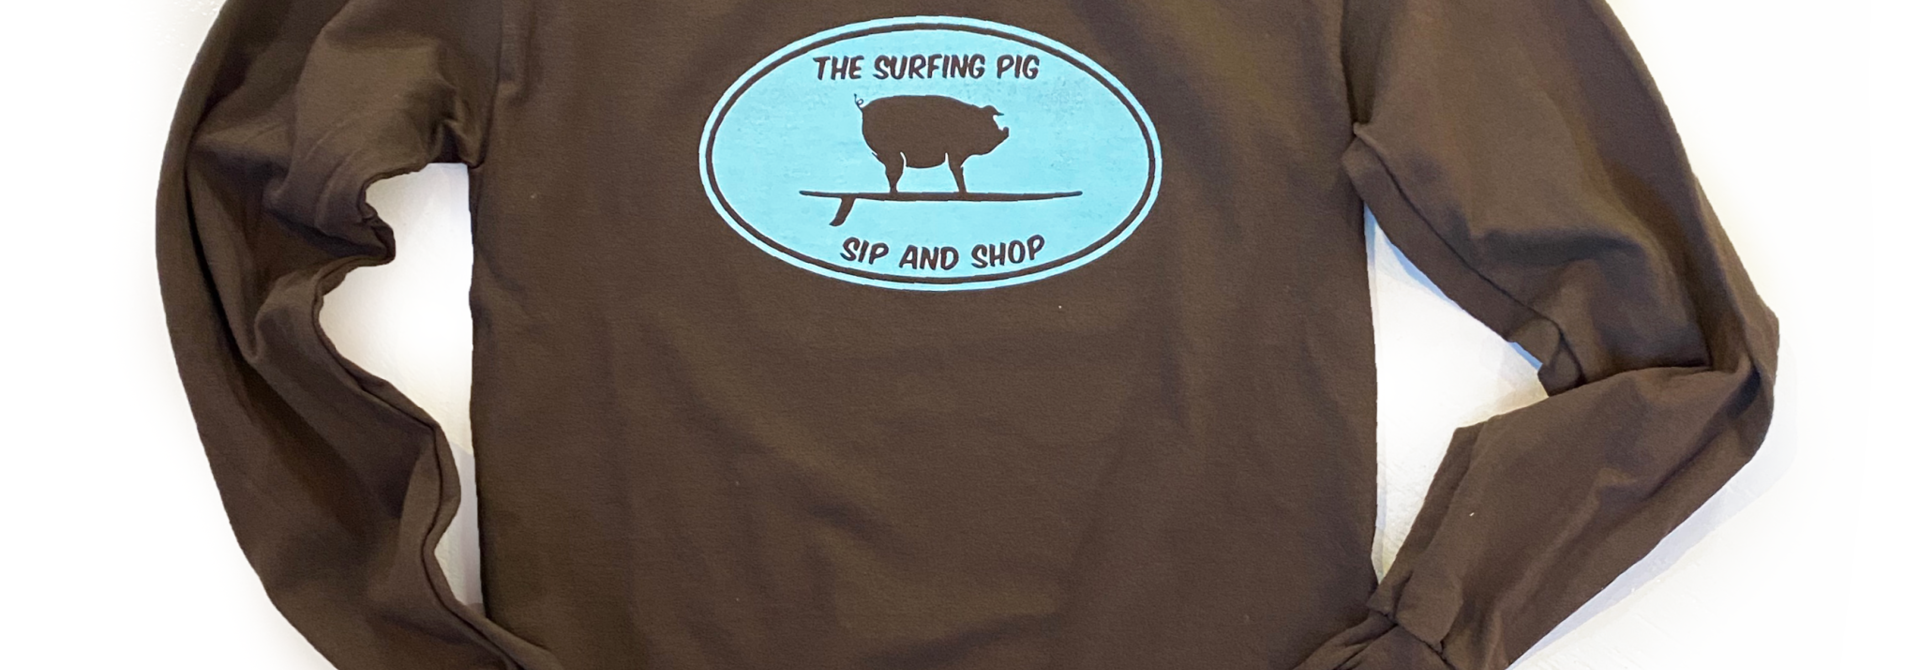 The Surfing Pig Sip and Shop Lon Sleeve, Brown